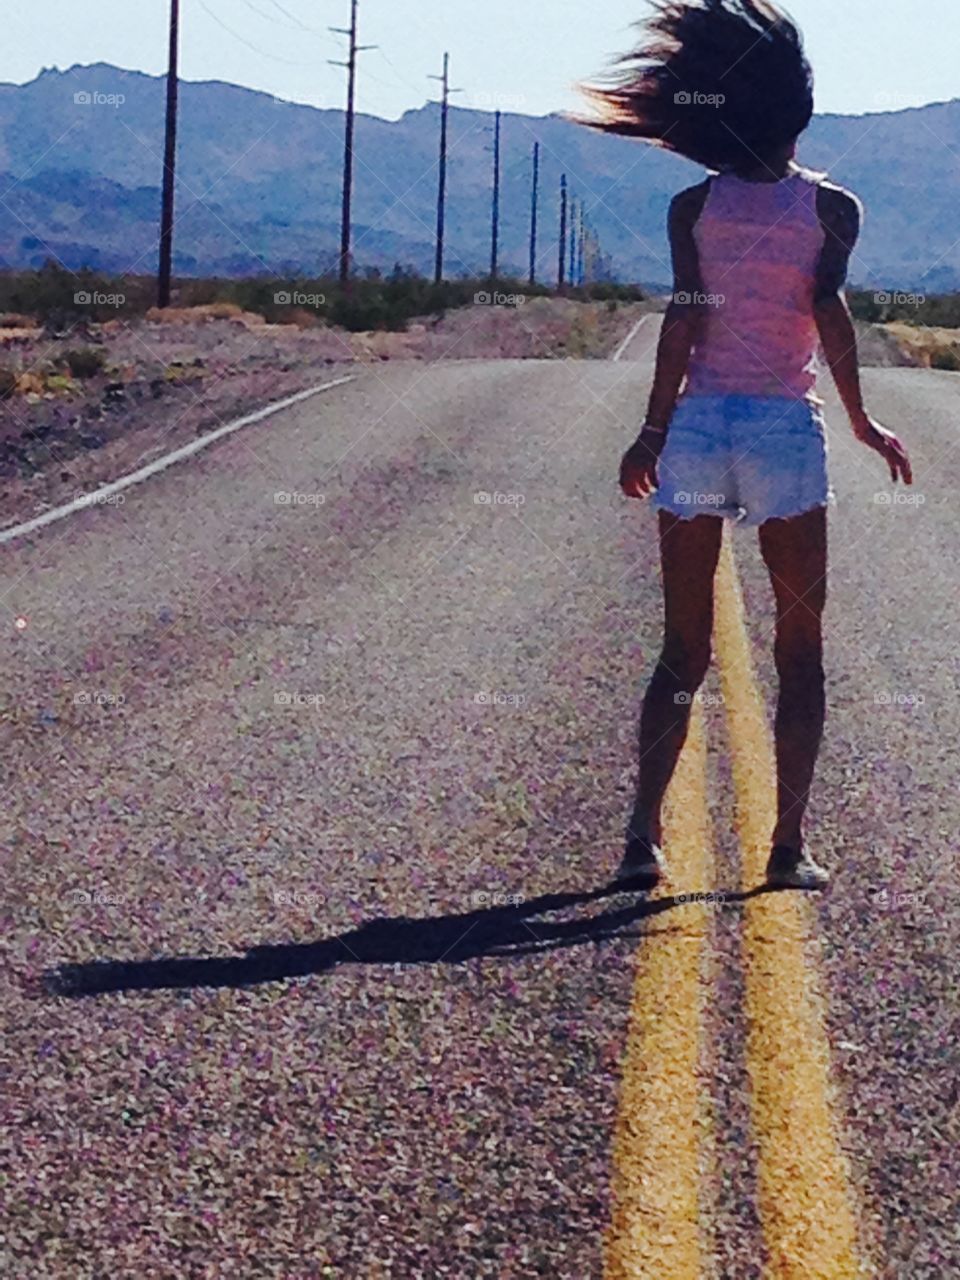 Girl on the route 66